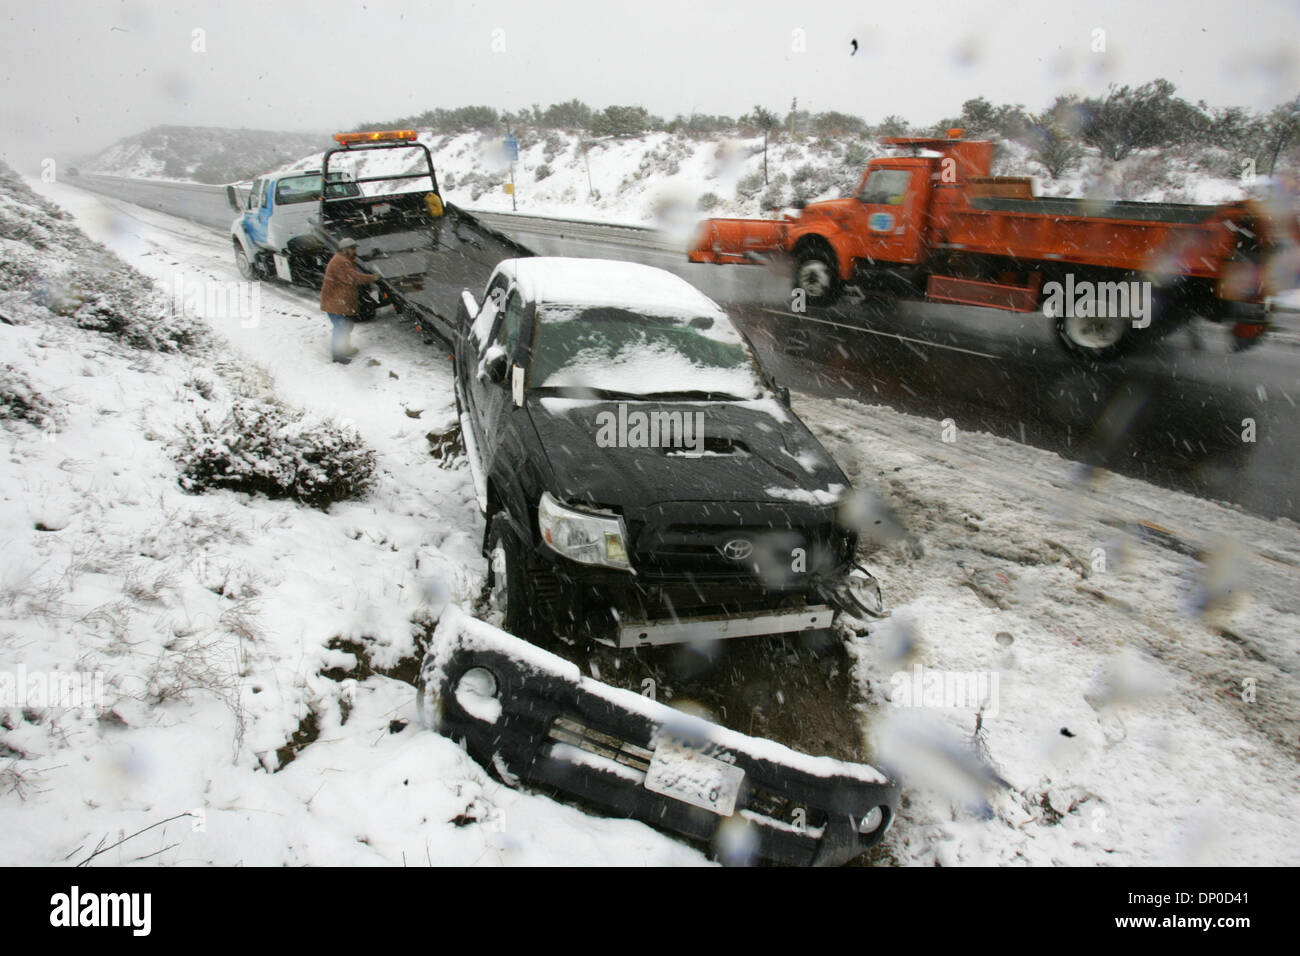 Mar 10, 2006; San Diego, CA, USA; Richard Steele with Jacumba Towing hooks up a wrecked pickup to load on his rollback on the south side of I-8 a couple miles west of the Ribbonwood Rd. exit. (TB: 1298 D-5) as a snow plough drives by. Mandatory Credit: Photo by John R. McCutchen/SDU-T/ZUMA Press. (©) Copyright 2006 by SDU-T Stock Photo